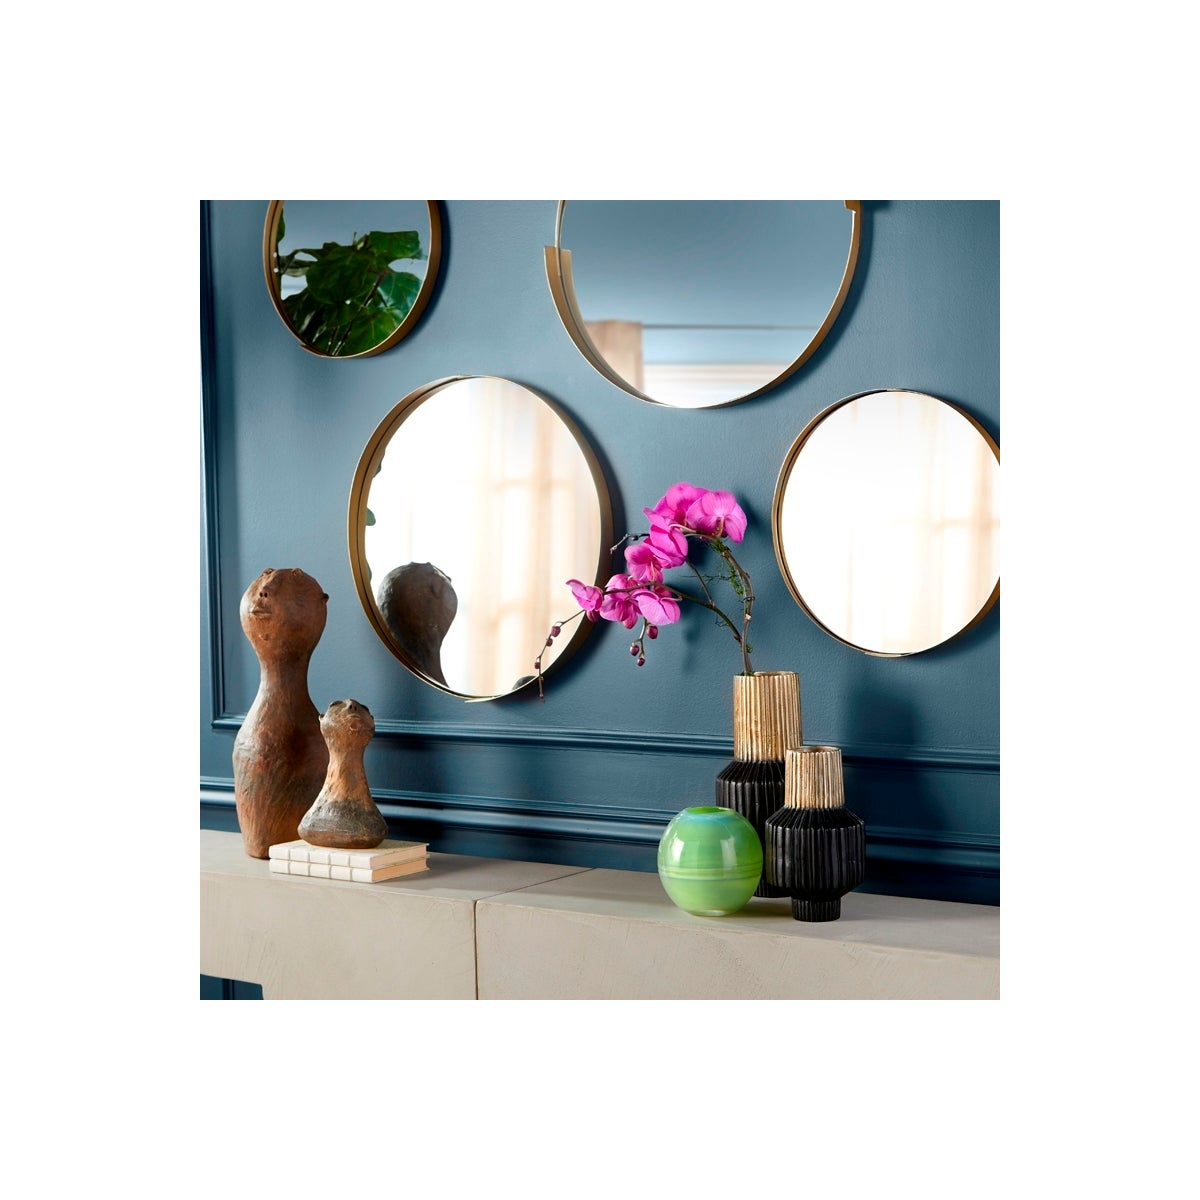 Gilded Band Mirror | Gold - Small